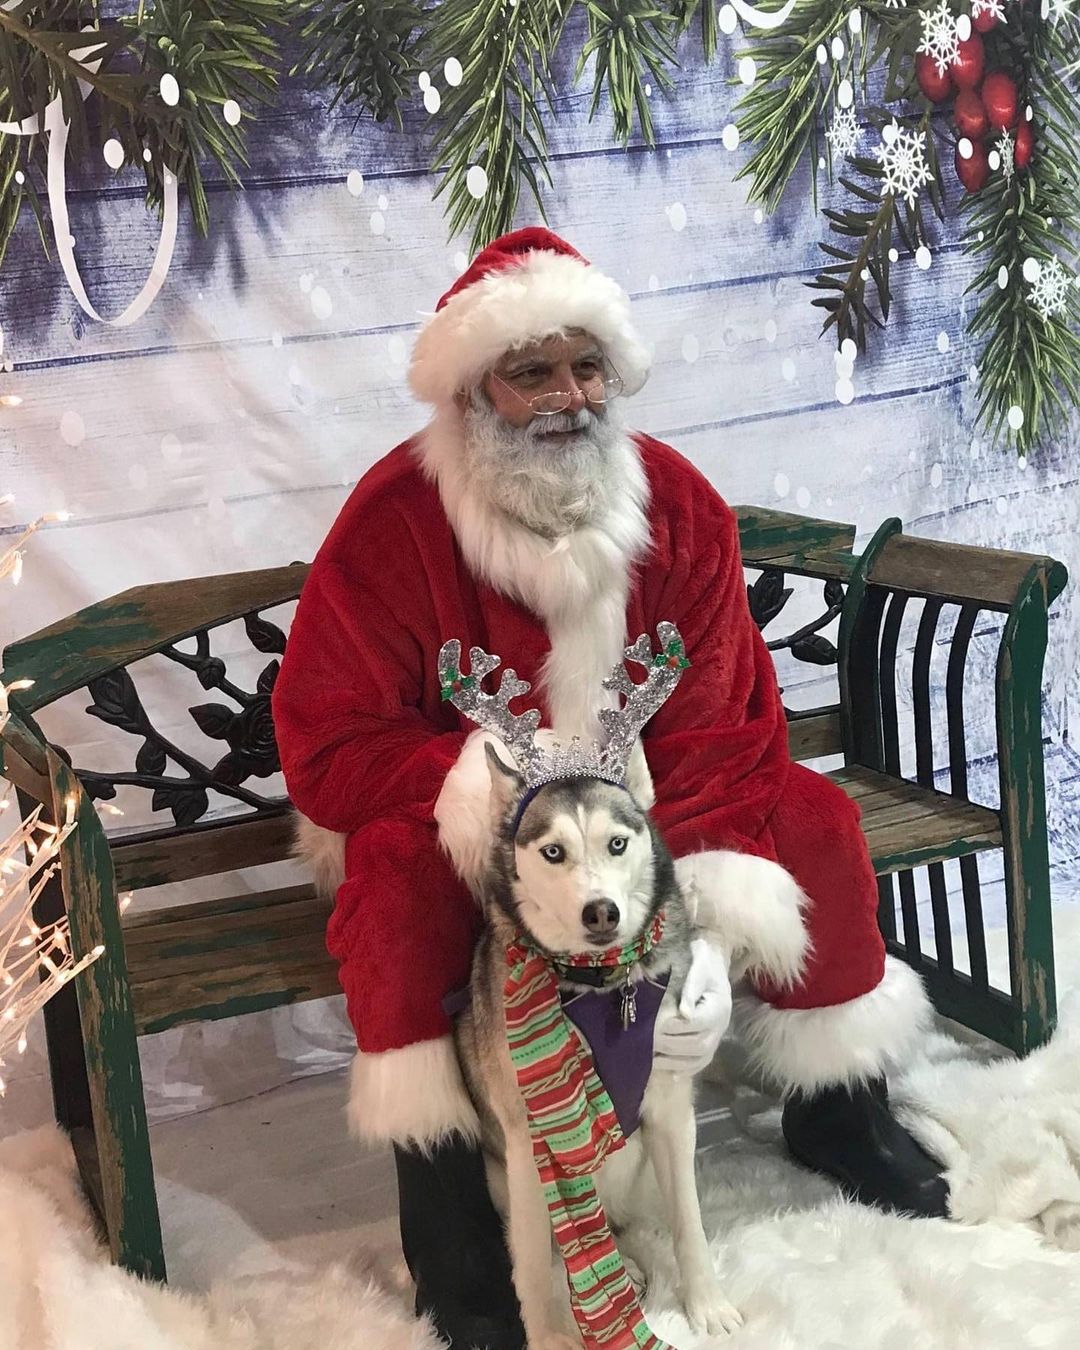 A busy Santa is a Happy Santa...according to Mrs. Claus!  Stop by to help out and feel free to bring your pups and family for your holiday photos!! 

So all you Denver and NoCo folks, here's Santa's Schedule:

**November 27th:**

  10AM-1230PM: The Dog Pawlour in Greeley 3616 W 10th St, Greeley, CO 

  300PM-530PM: Finkel and Garf Boulder: 5455 Spine Road, Boulder CO

**November 28th**: 1200PM-300PM - Chuck and Don's Greenwood Village CO: 5926 S Holly St 

**December 4th: **10AM-1PM Columbine Federal Credit Union 4902 E Dry Creek Rd

**December 5th: ** 100PM-400PM Wag N Wash Aurora - 15405 E Briarwood Cir

**December 11th: **12PM-4PM Lone Tree Brewing Company - 8200 Park Meadows Dr

**December 12th**: 12PM-4PM Lone Tree Brewing Company - 8200 Park Meadows Dr.